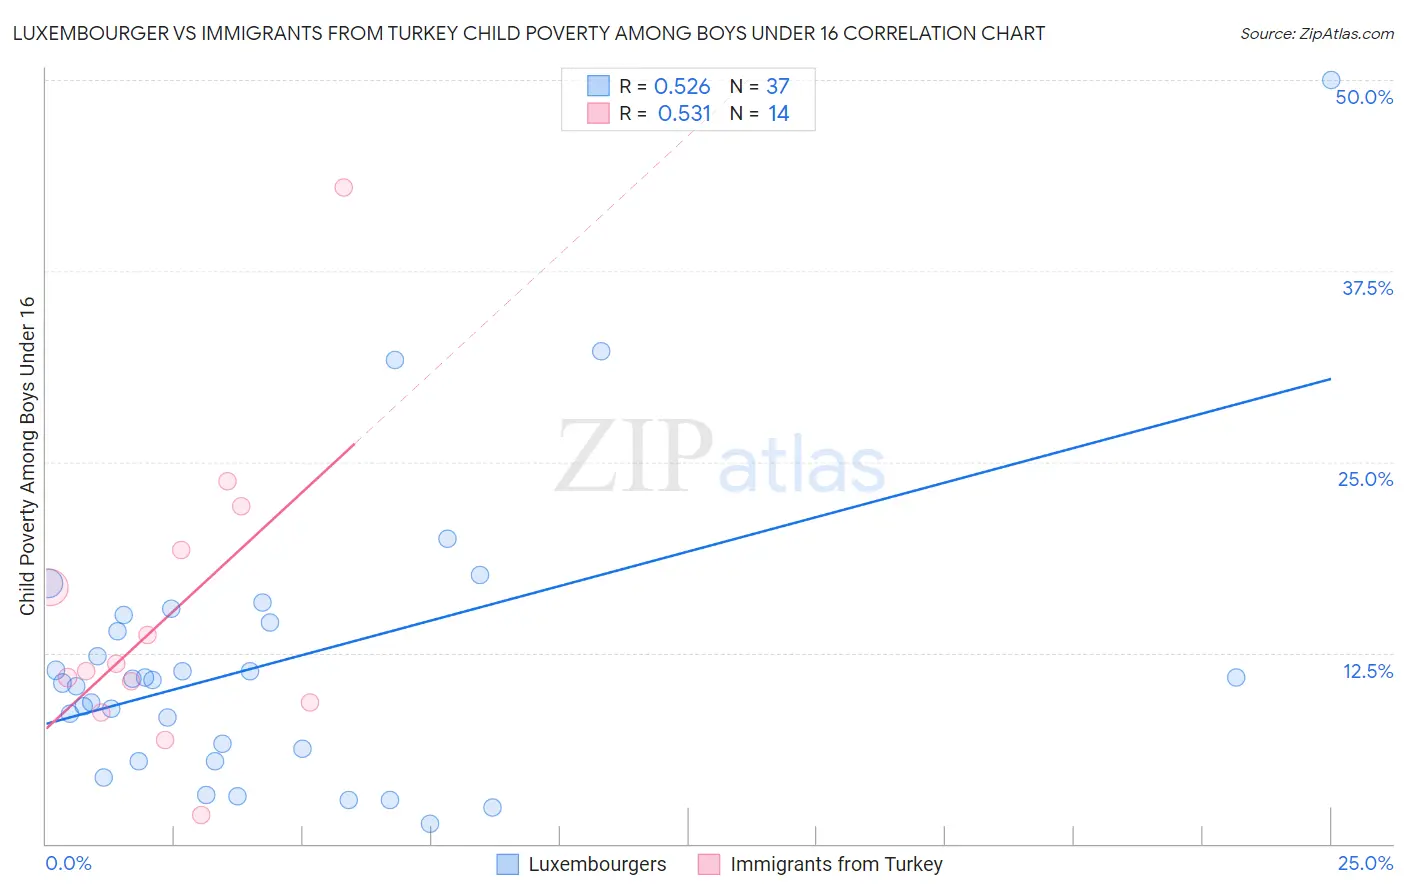 Luxembourger vs Immigrants from Turkey Child Poverty Among Boys Under 16